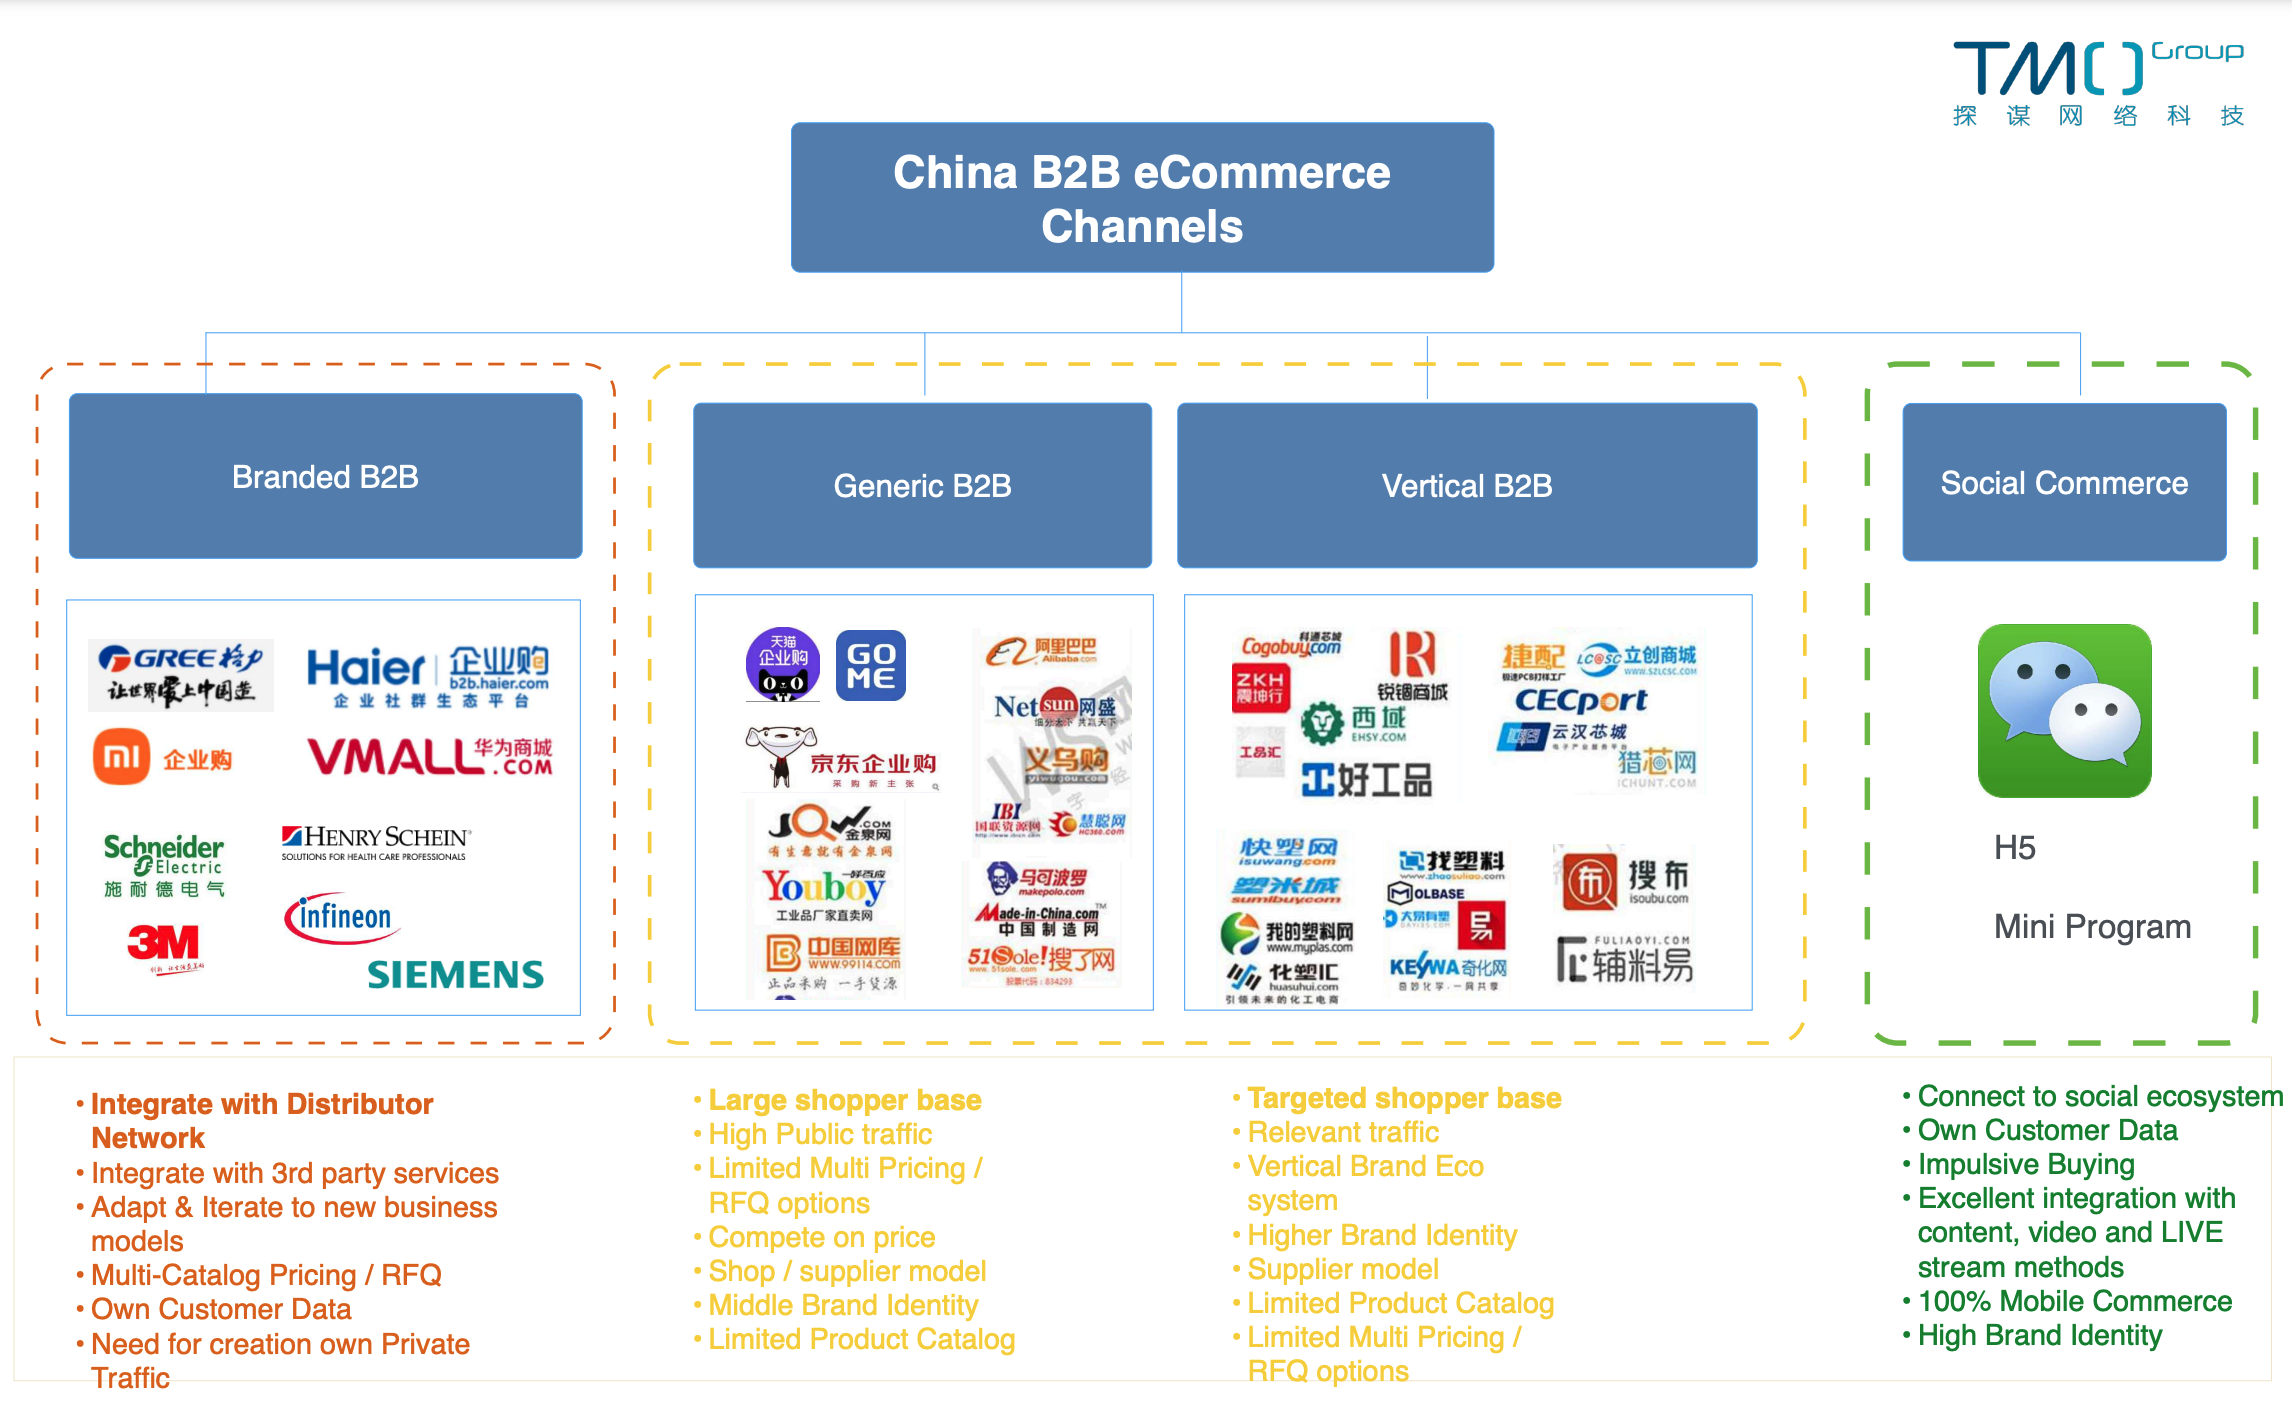 Scale your business through B2B e Commerce in China